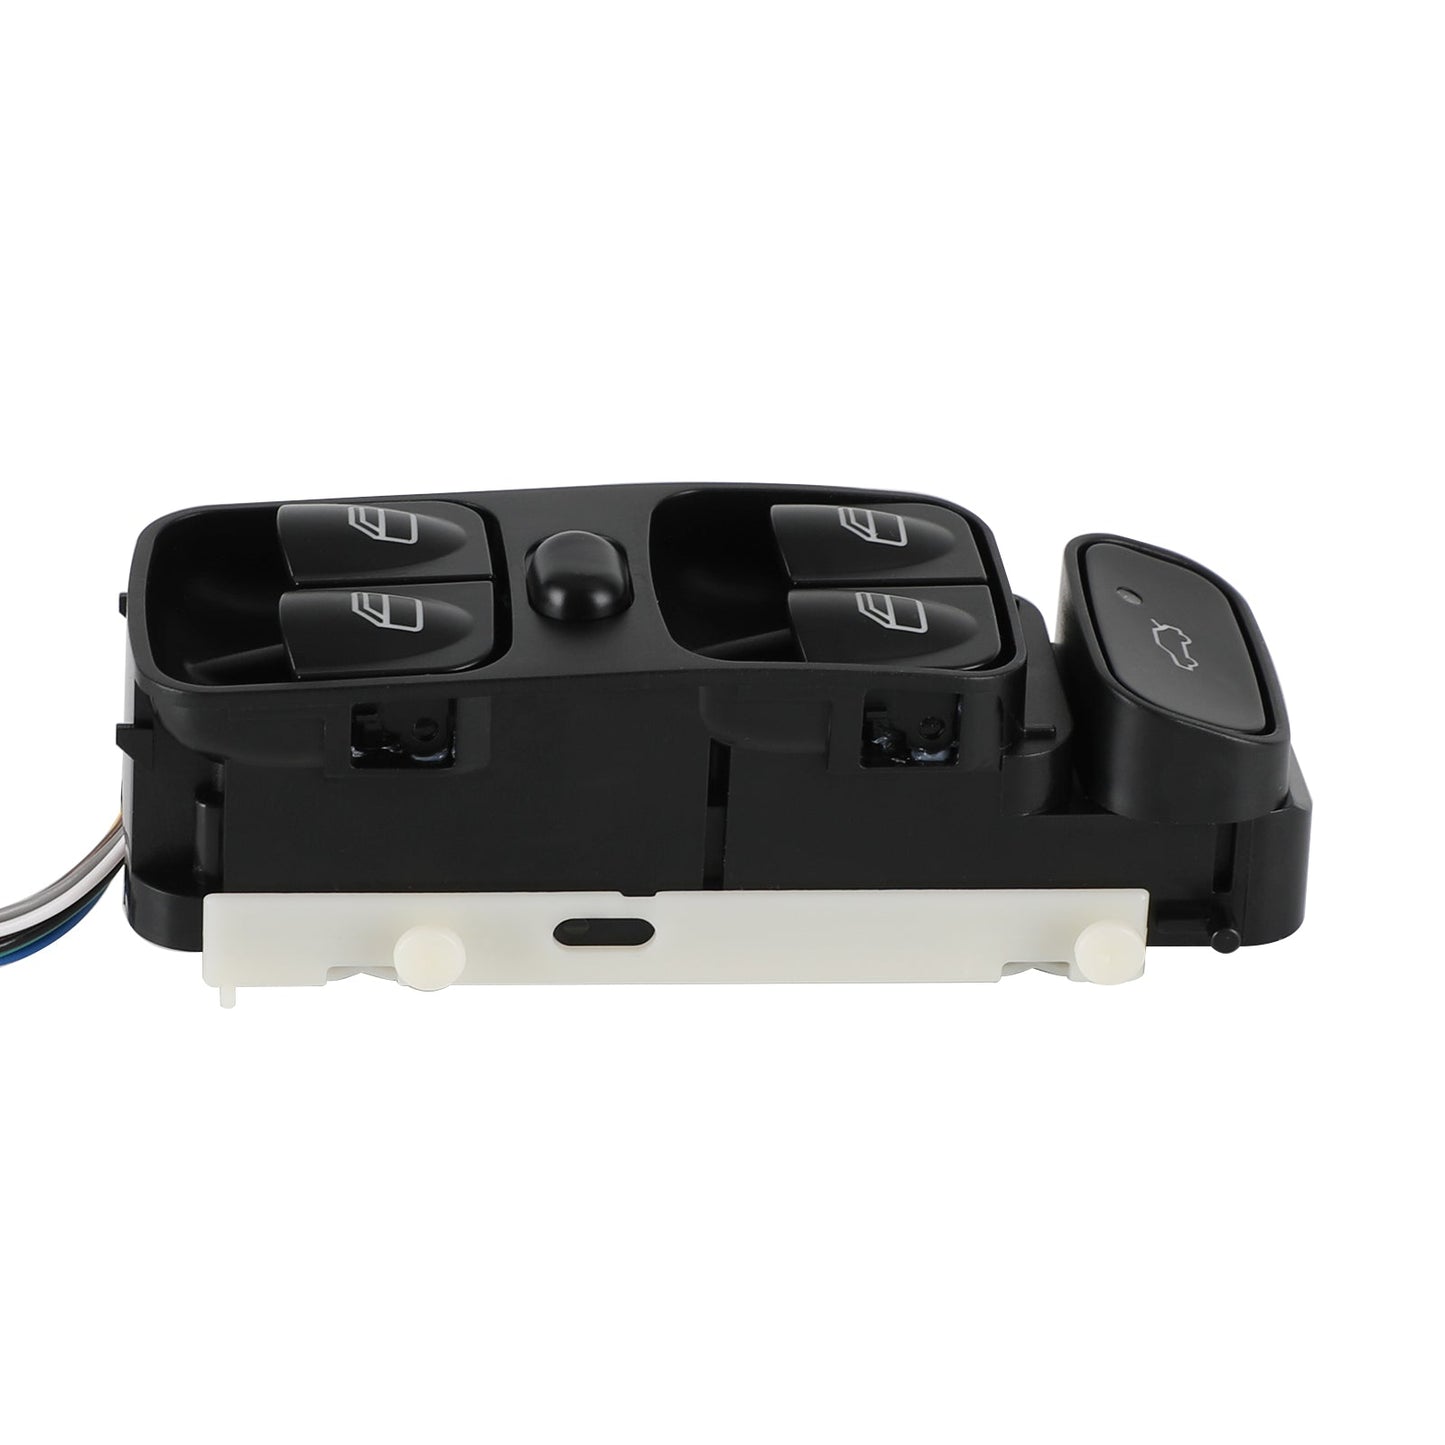 Driver Master Window Switch For Mercedes Benz C-Class W203 S203 C230 2038210679